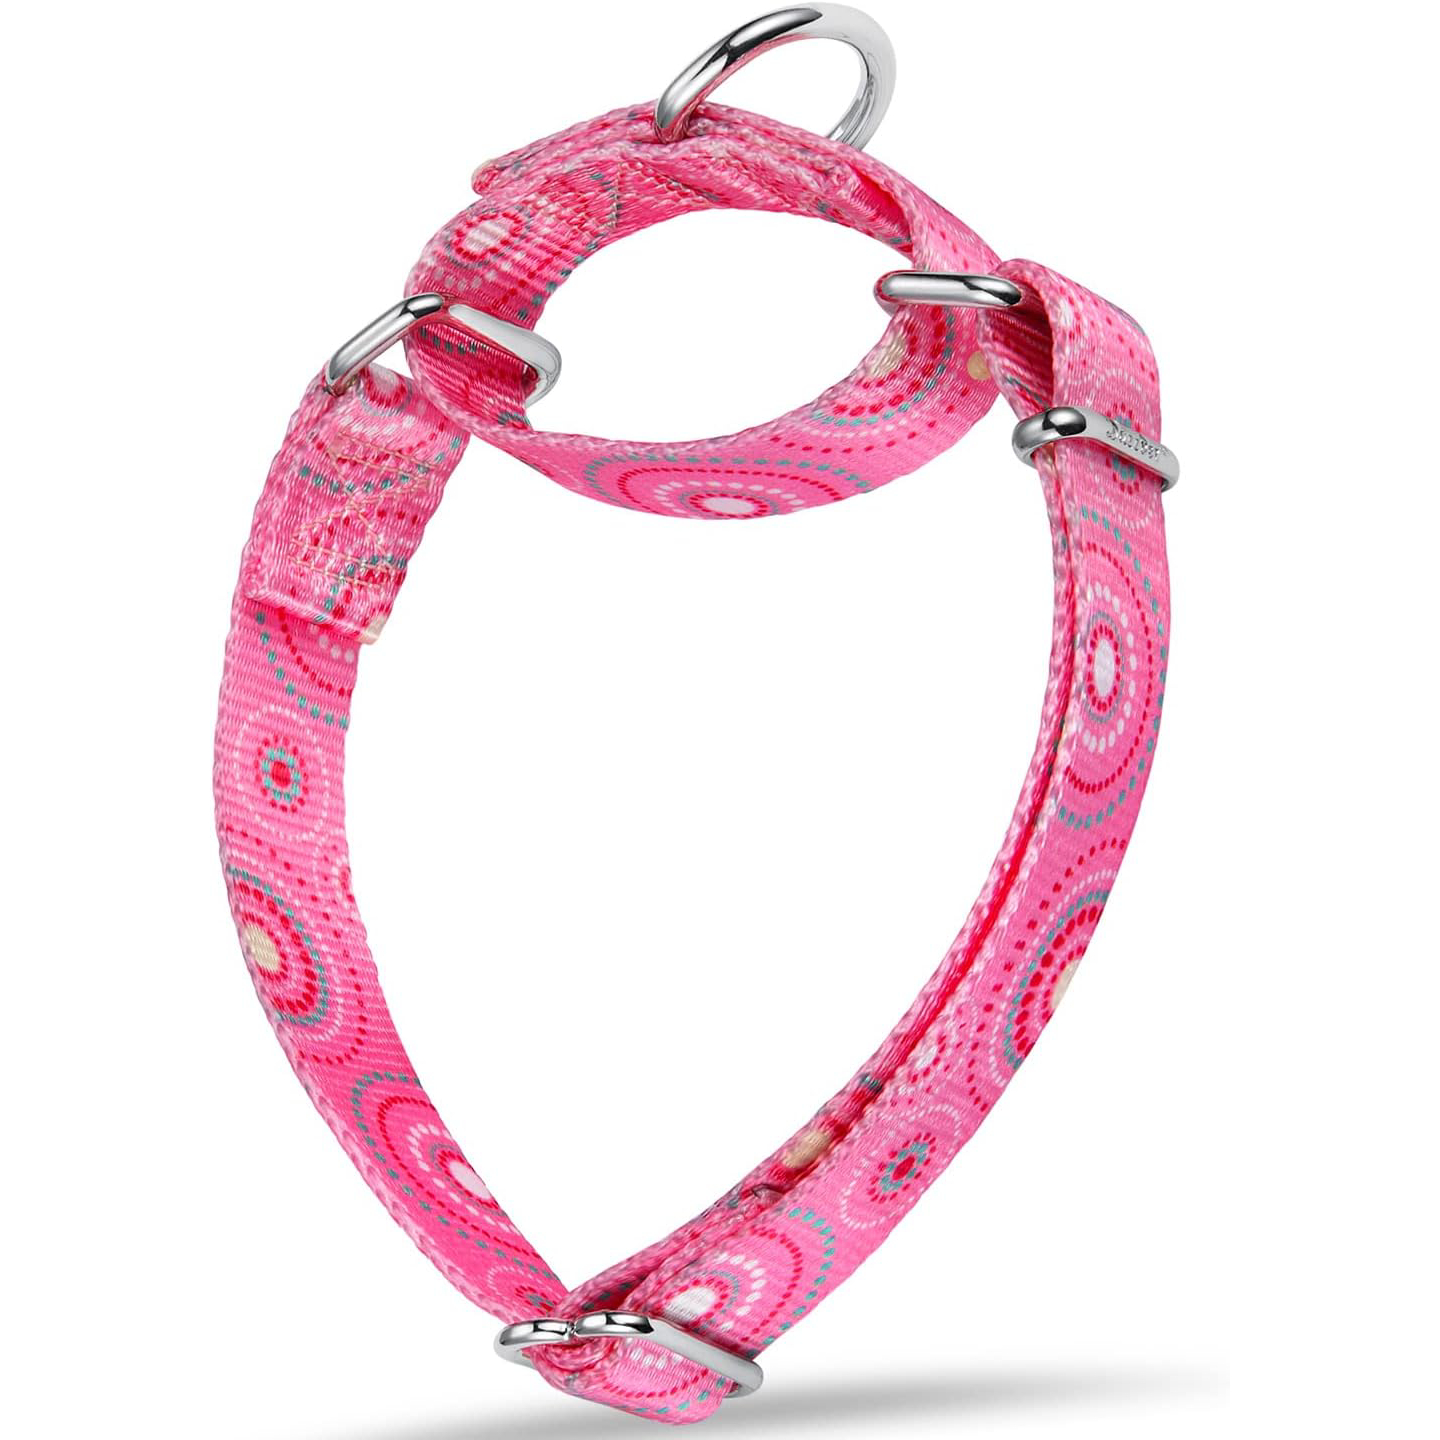 Dazzber Martingale Collar Dog Collar No Pull Pet Collar Heavy Duty Dog Martingale Collars Silky Soft with Unique Pattern for Medium and Large Dogs 